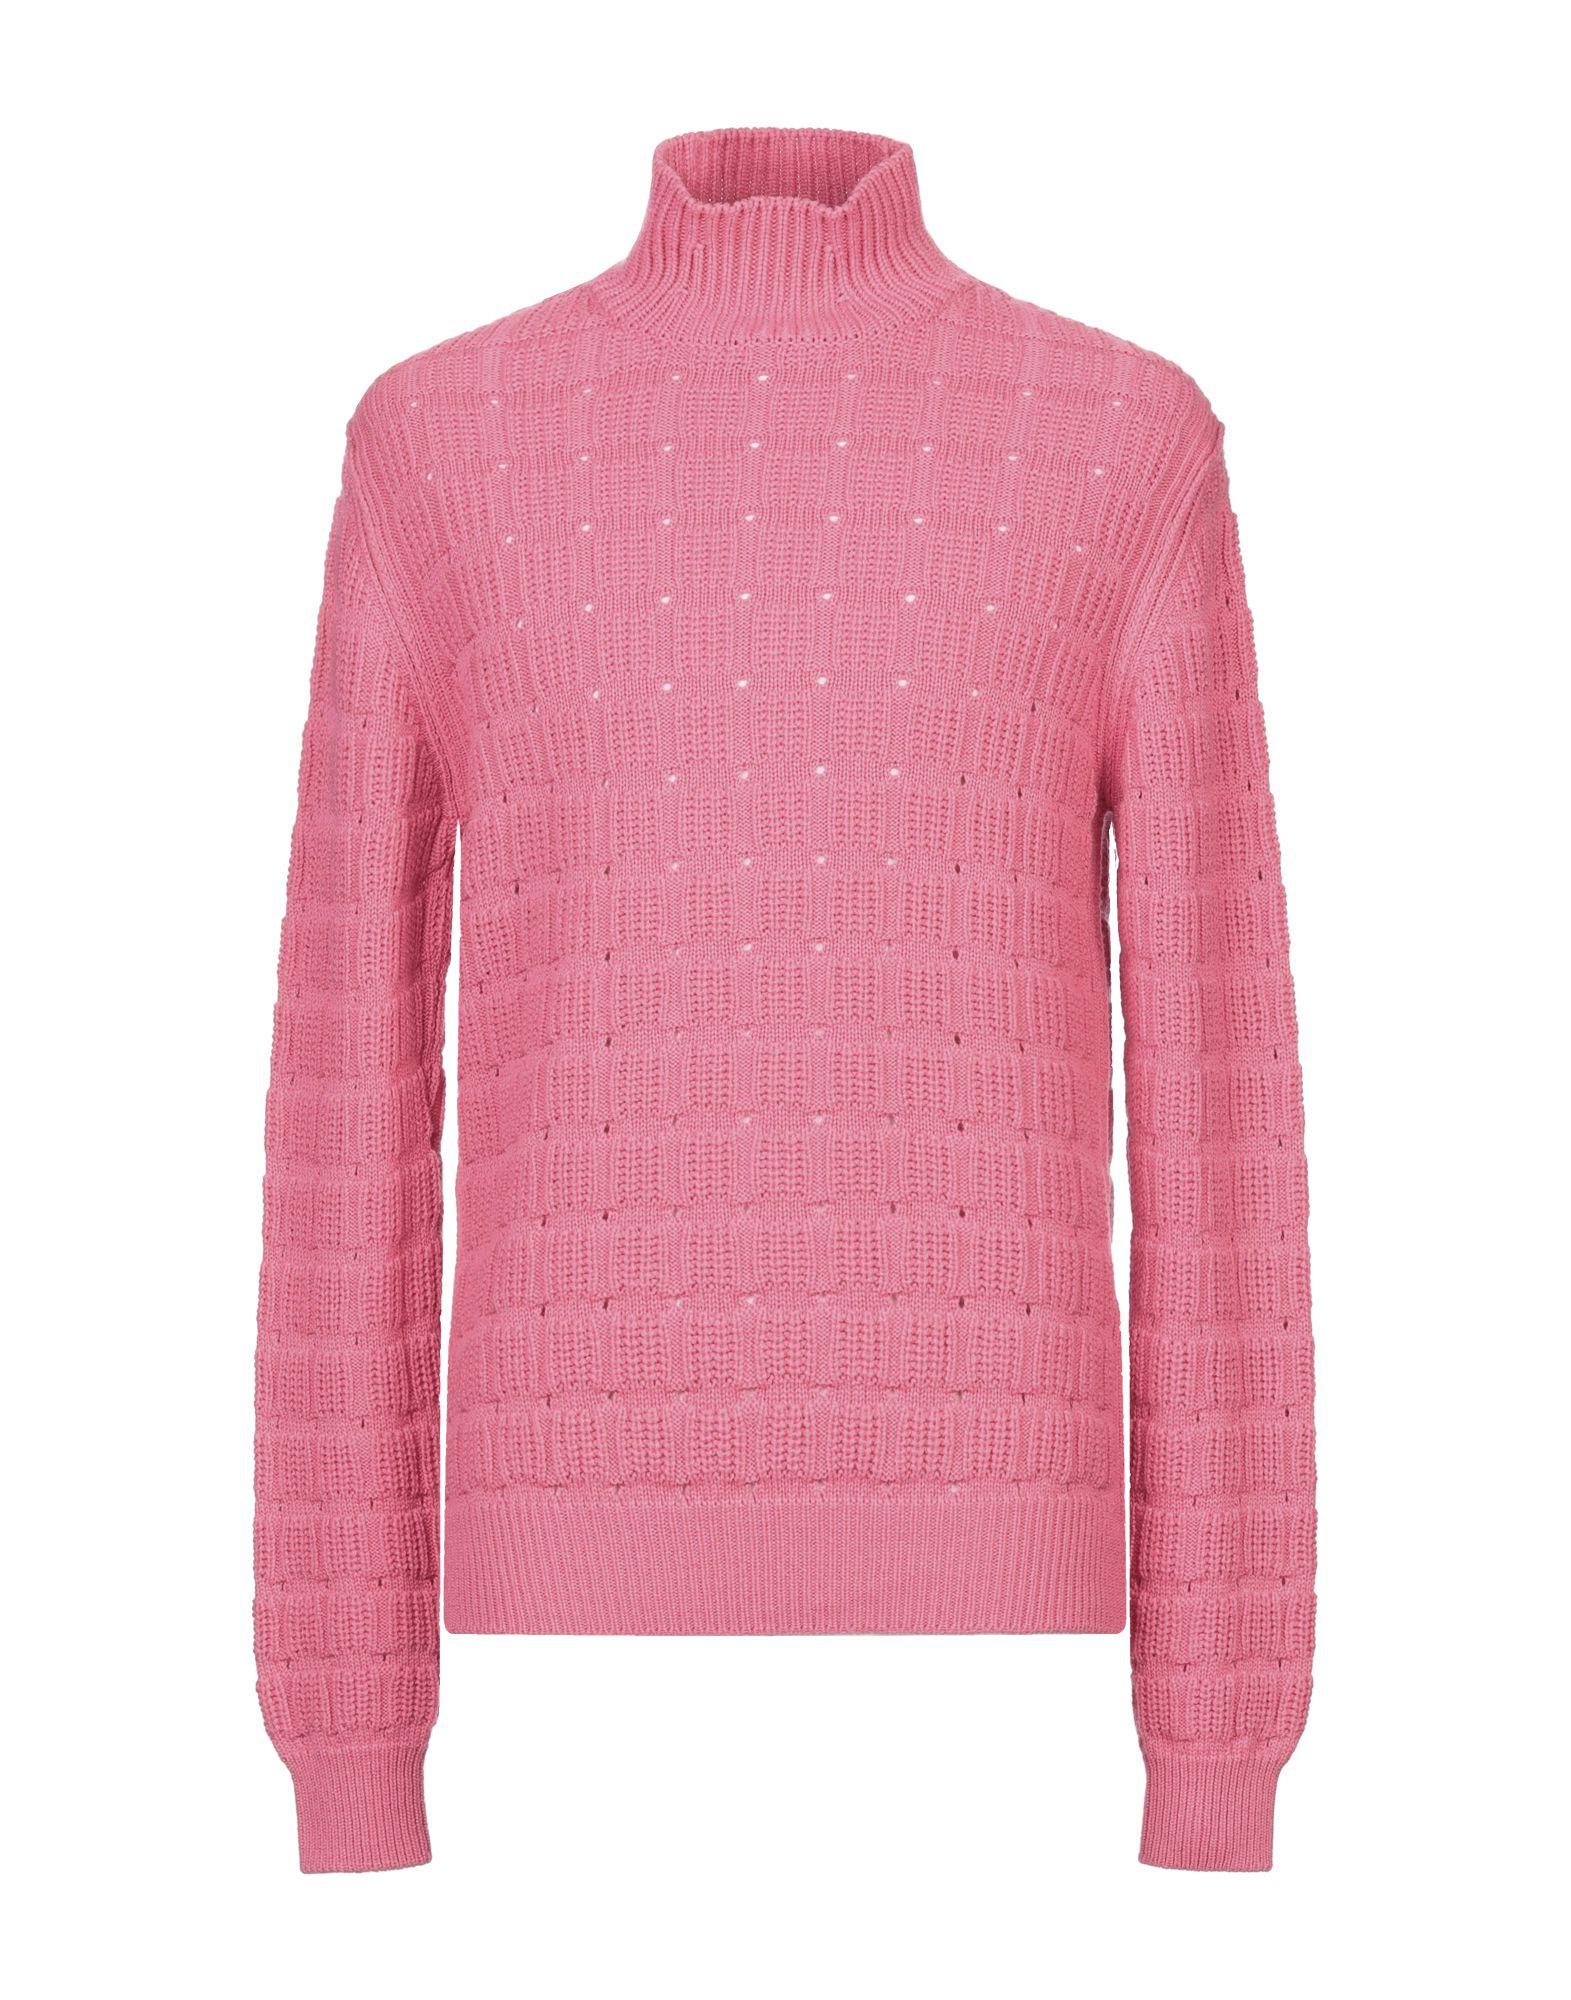 Cruciani Turtleneck in Pink for Men - Lyst